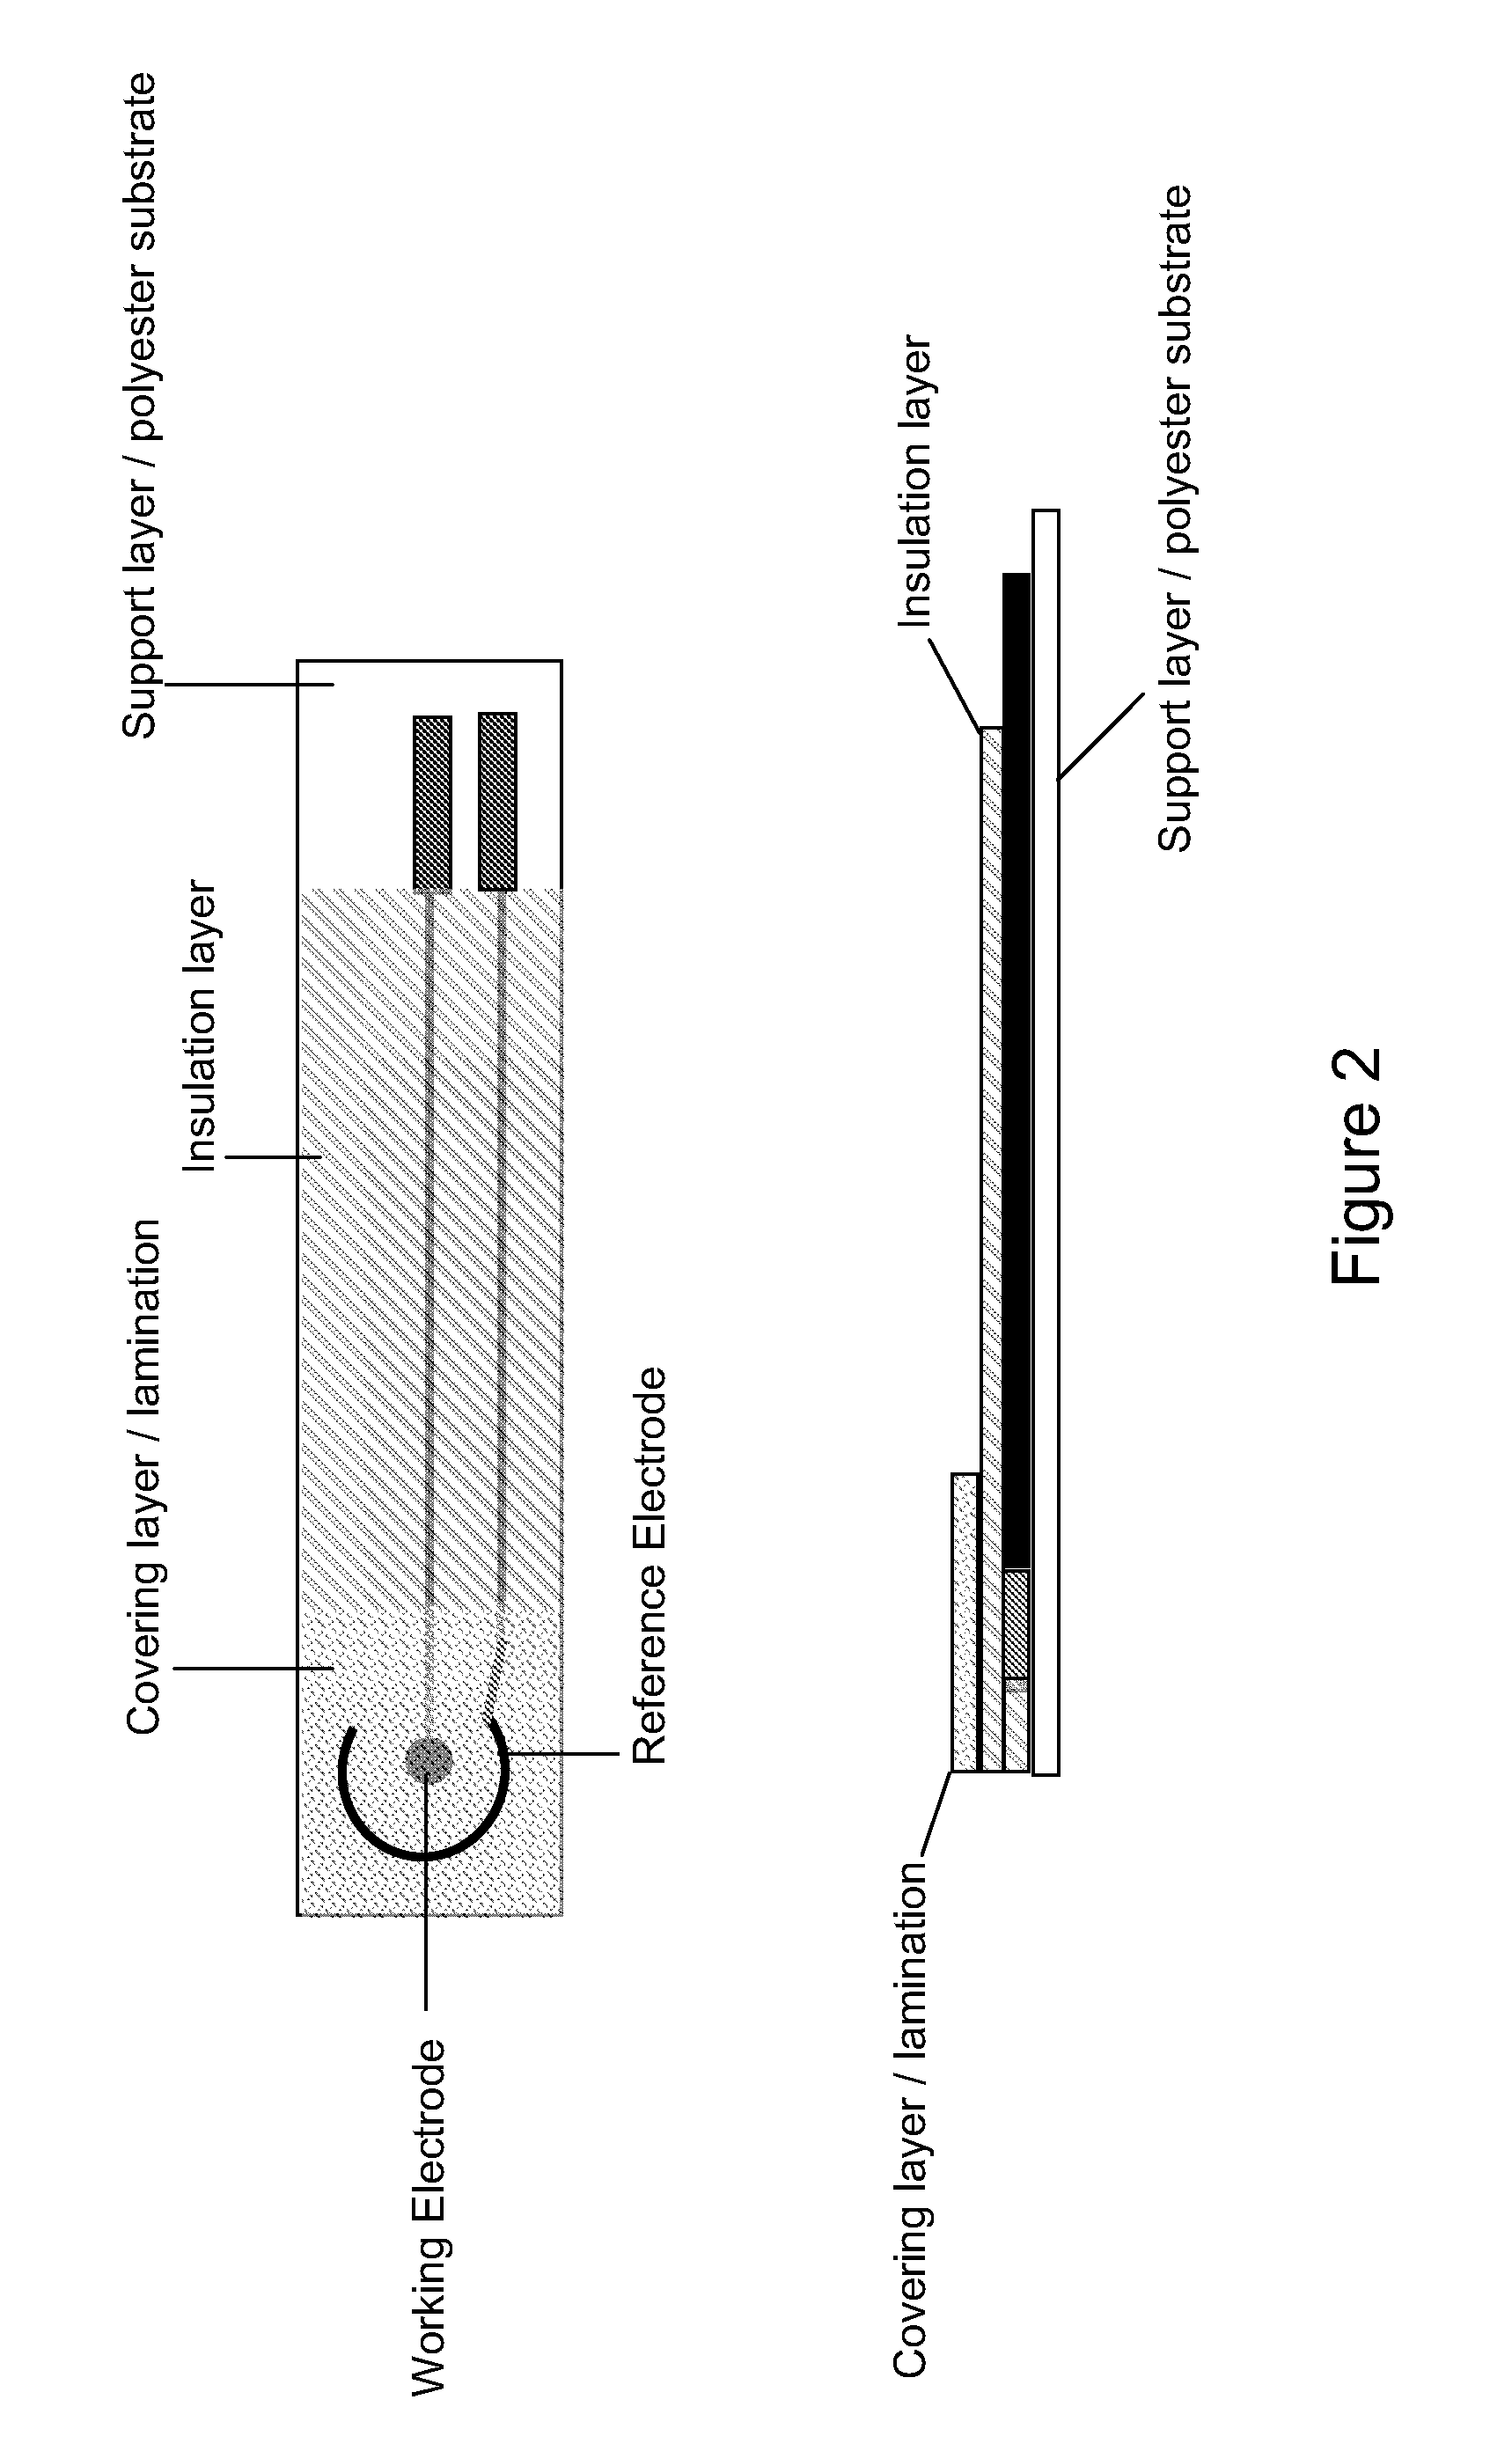 Electrochemical biosensor for direct determination of percentage of glycated hemoglobin